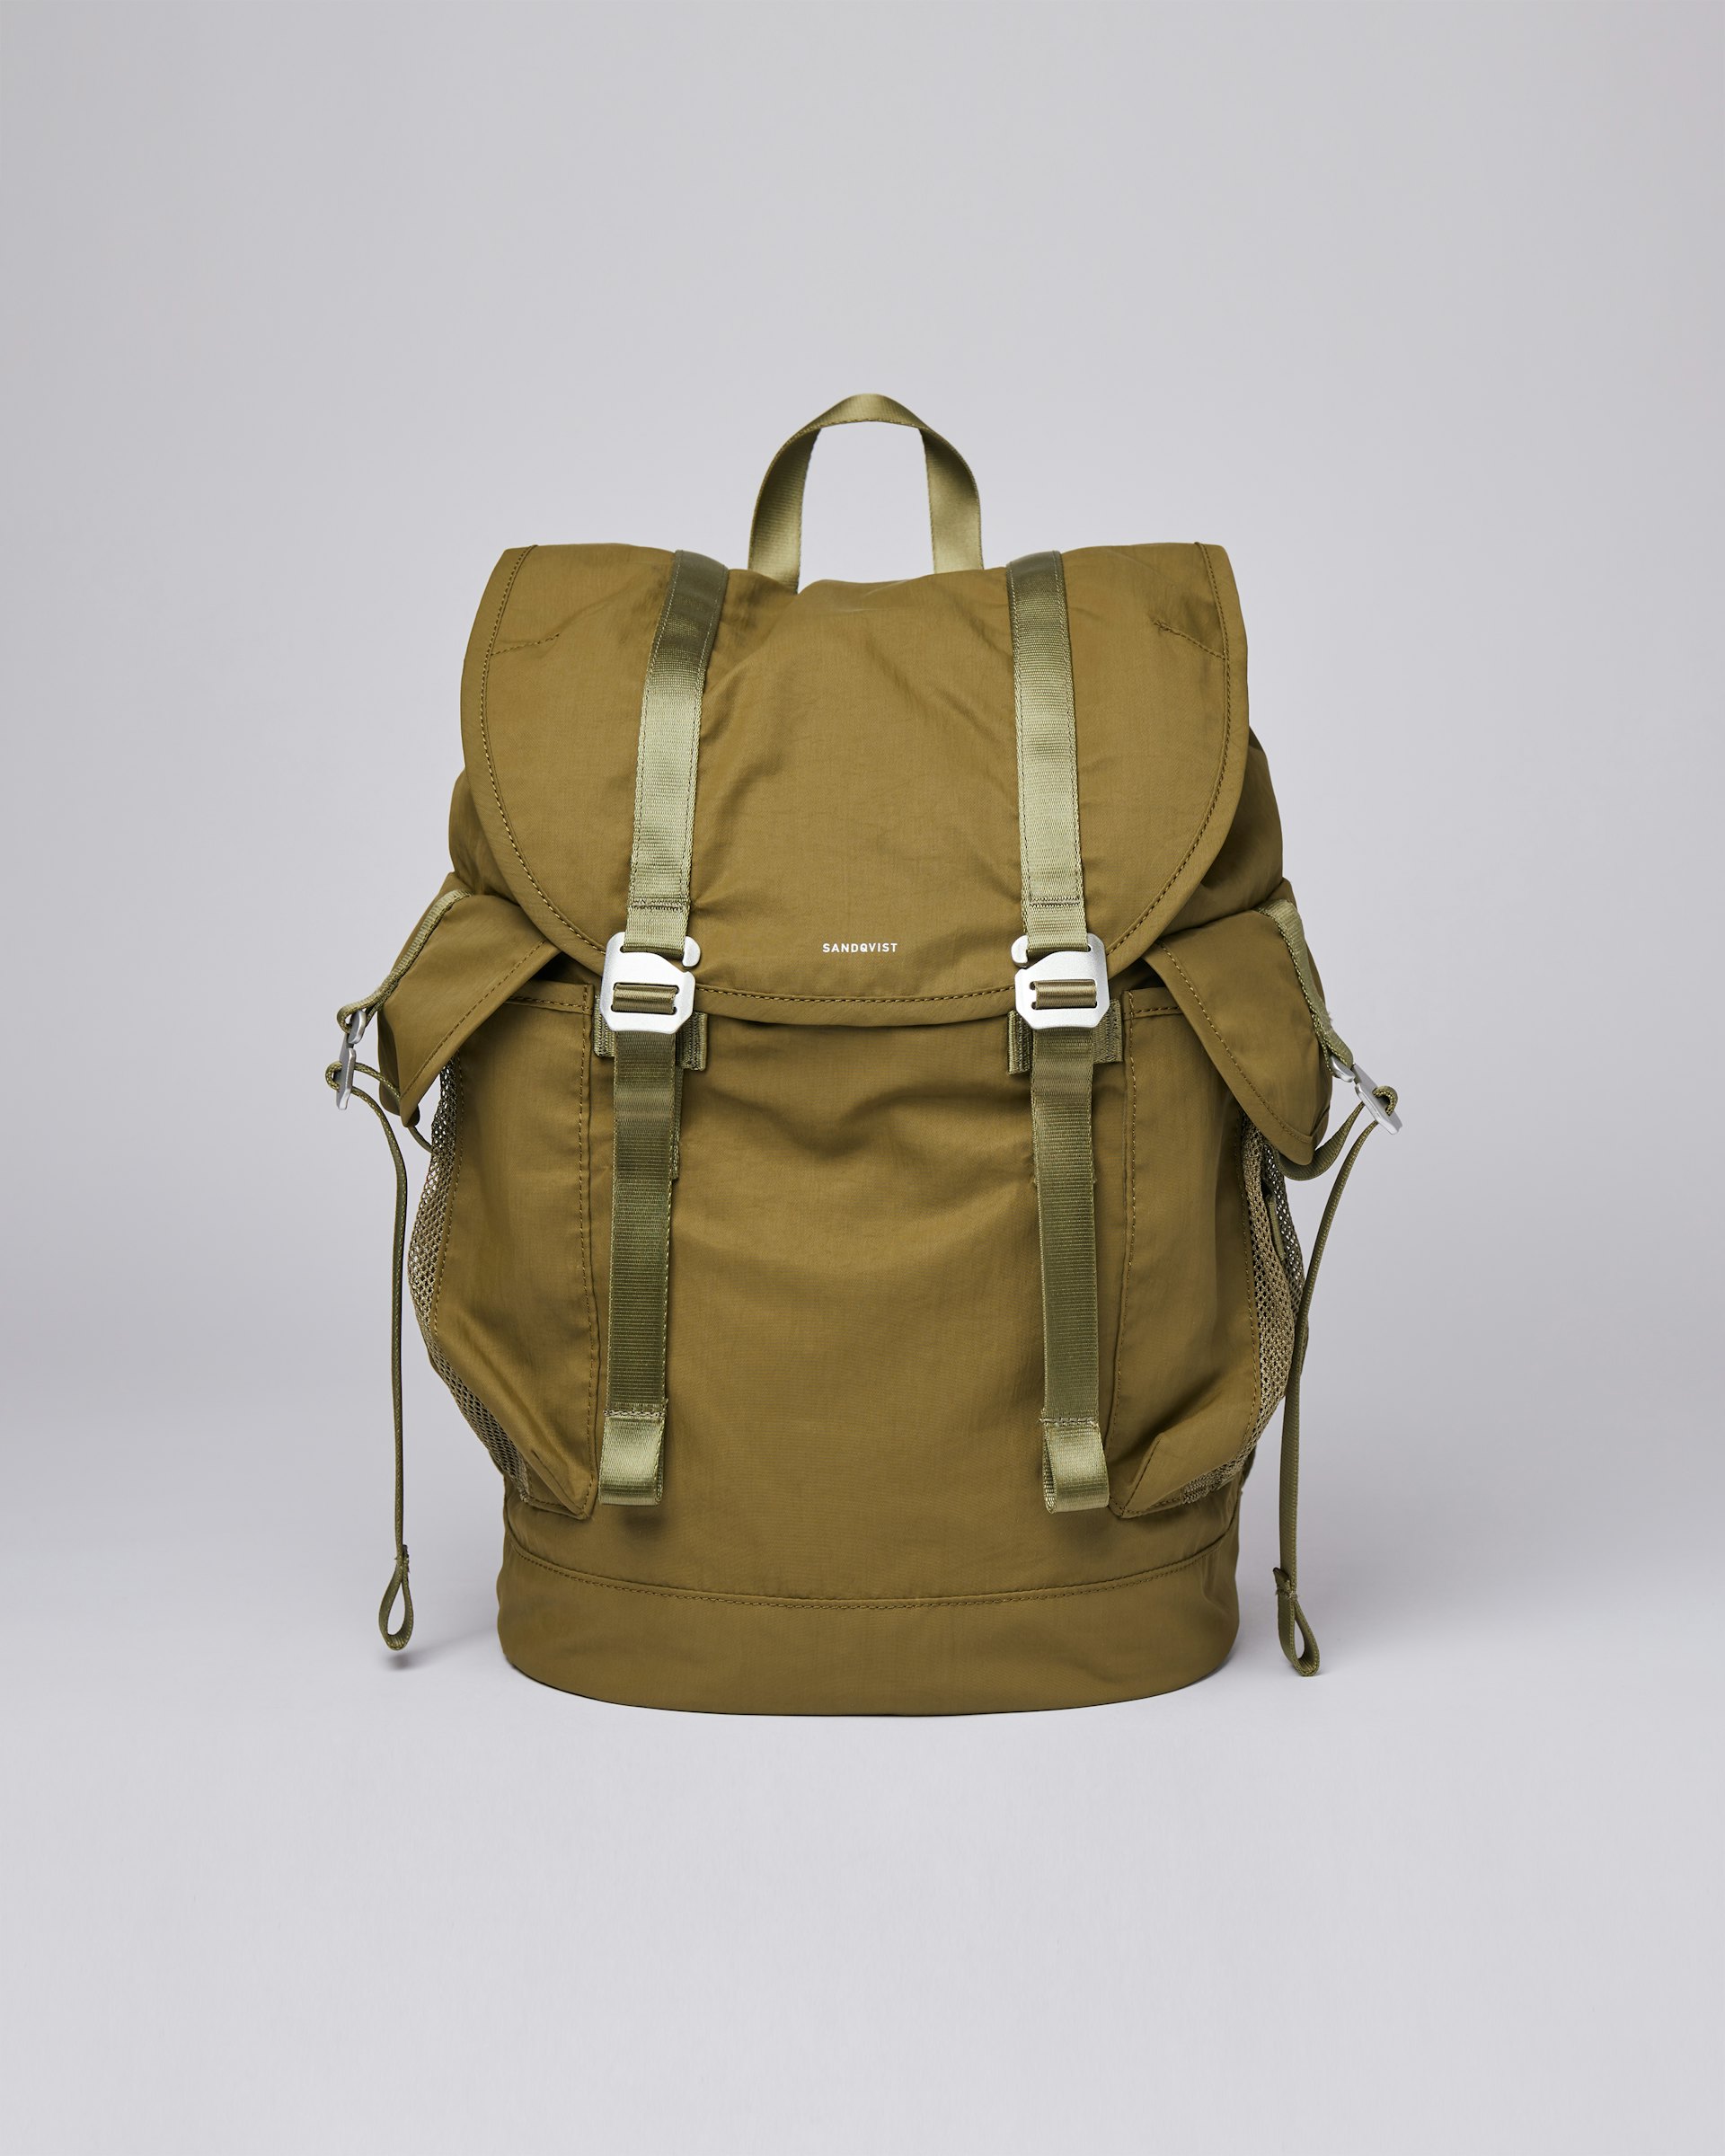 Charlie Vegan belongs to the category Backpacks and is in color military olive (1 of 7)